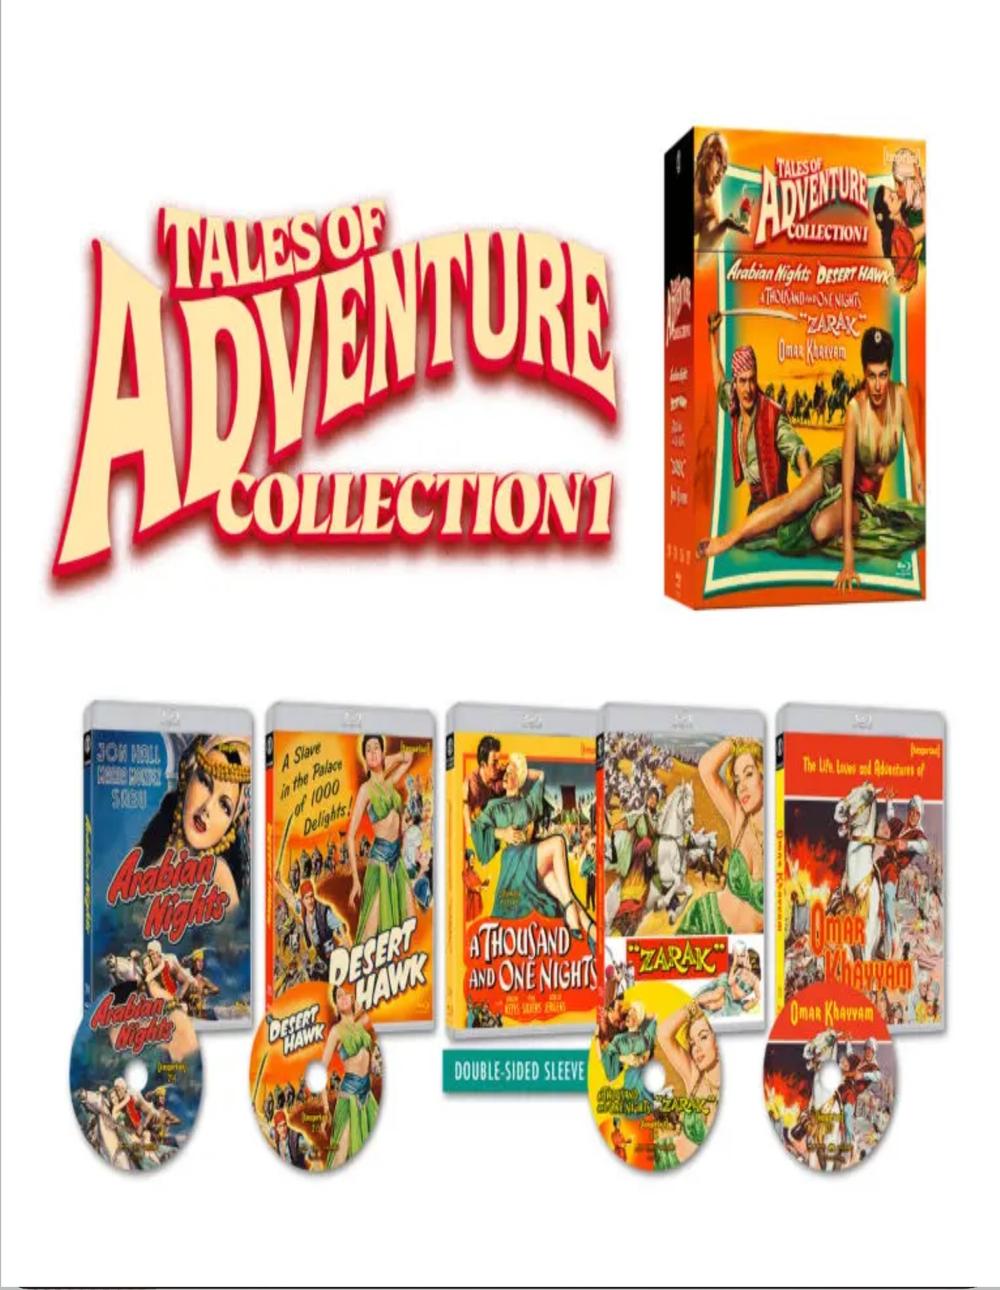 TALES OF ADVENTURE COLLECTION (REGION FREE IMPORT - LIMITED EDITION) BLU-RAY